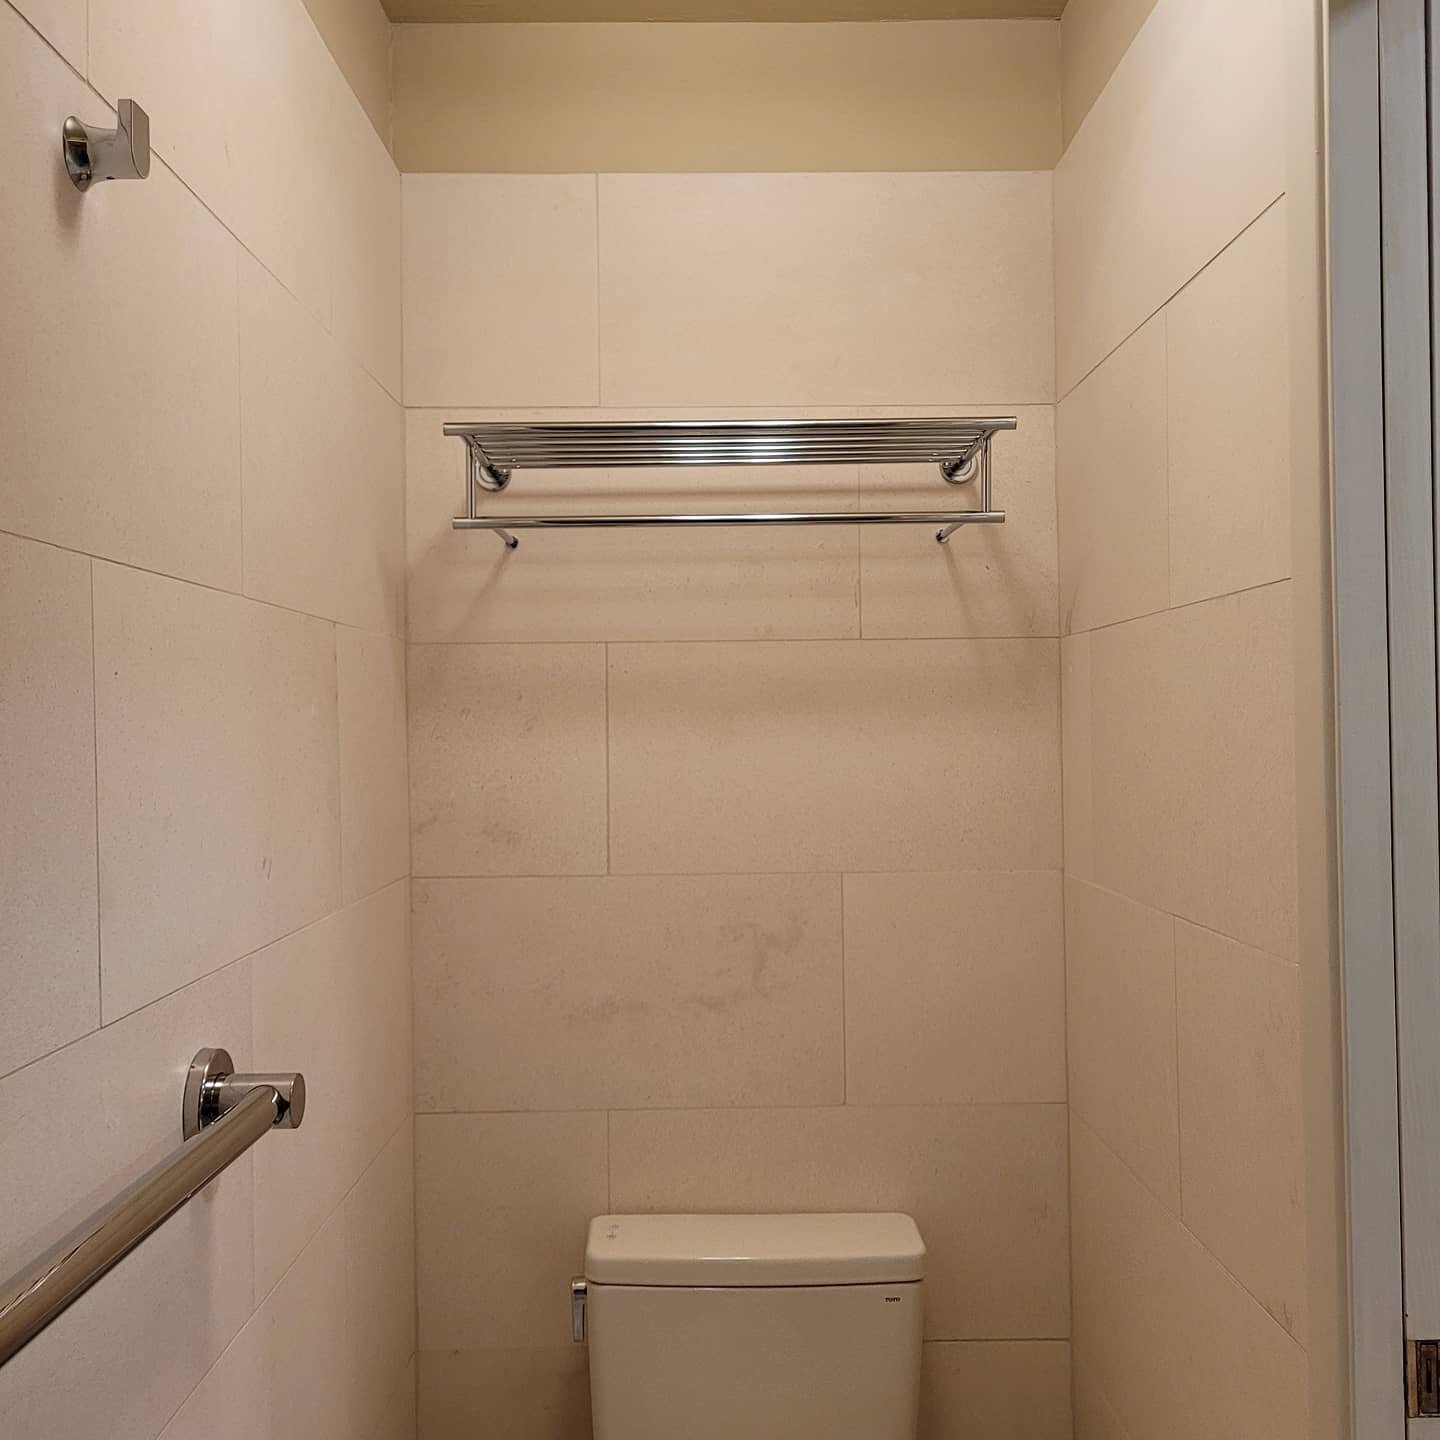 That toilet paper holder really brings the room together!

This week's cubicle helped me get over my fear of putting holes in tile!

It's a pleasure to see another craftsman's design, and to complete the process. Remember: we are ALL part of the prog